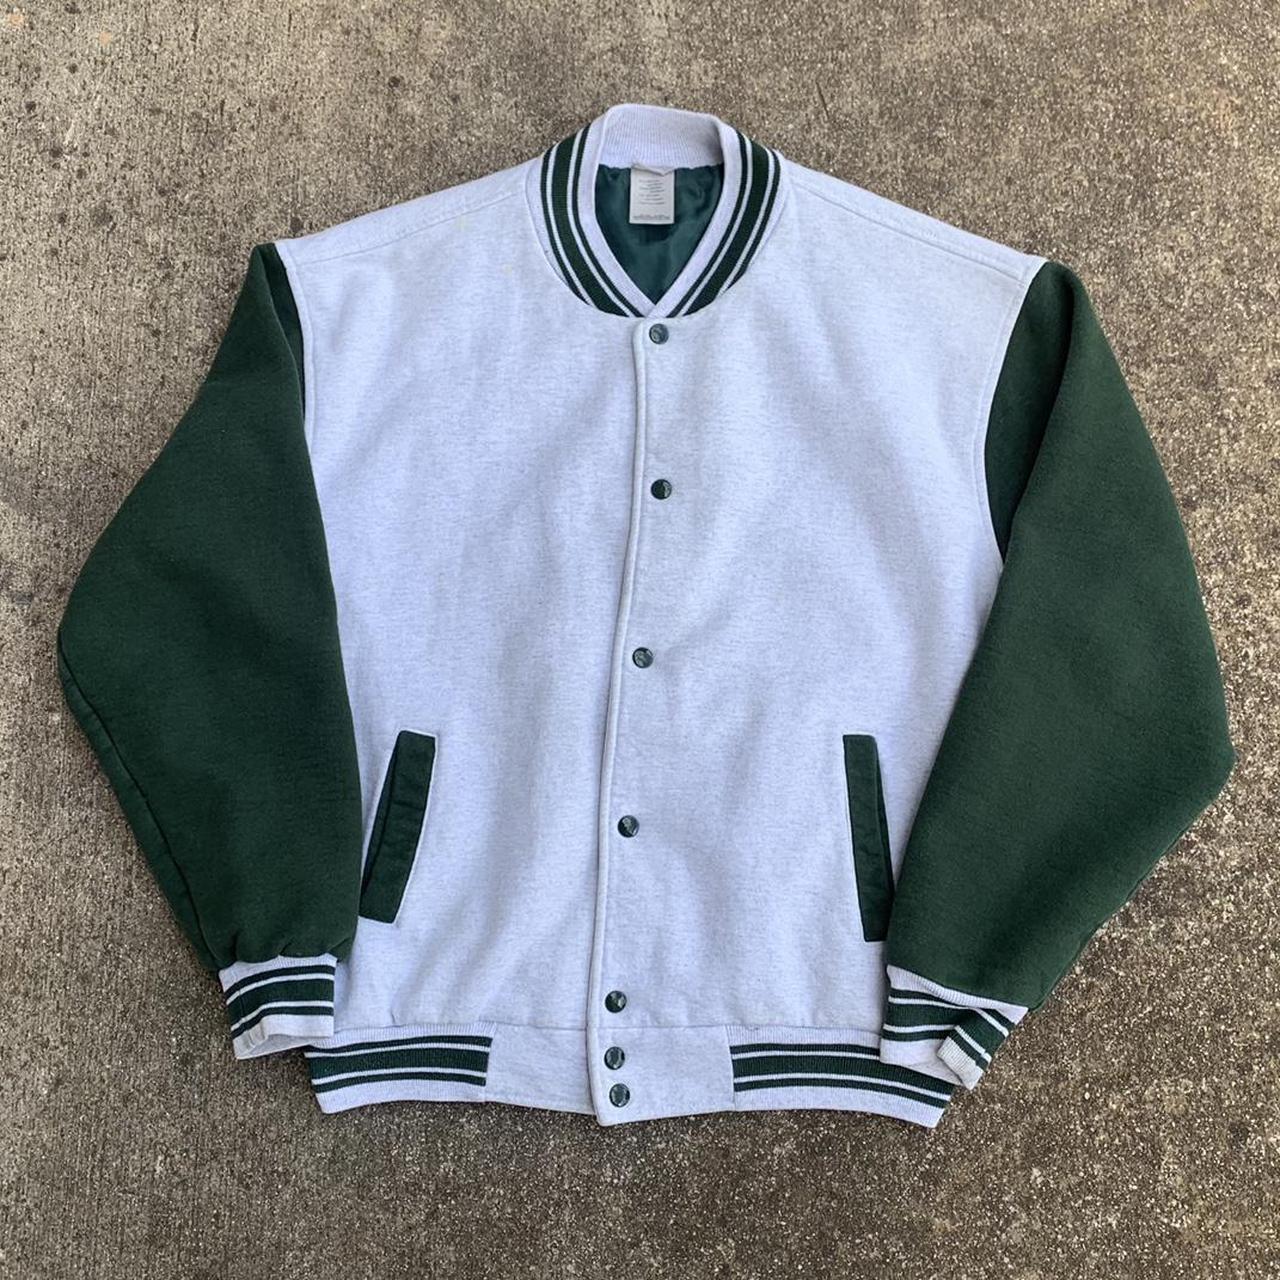 American Vintage Men's Green and White Jacket